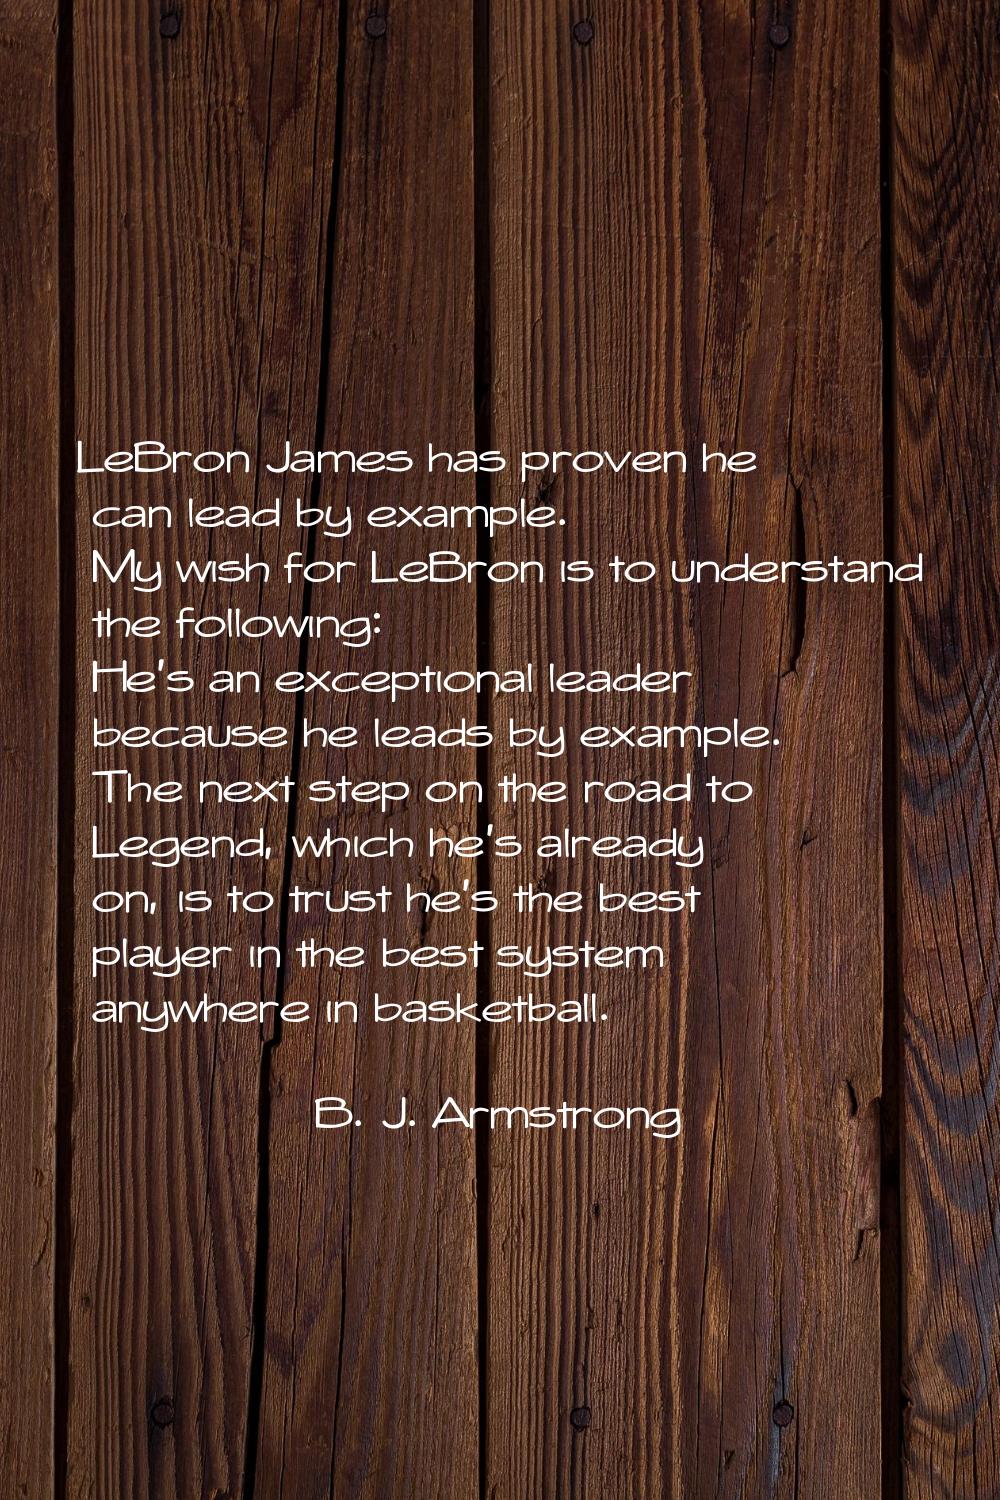 LeBron James has proven he can lead by example. My wish for LeBron is to understand the following: 